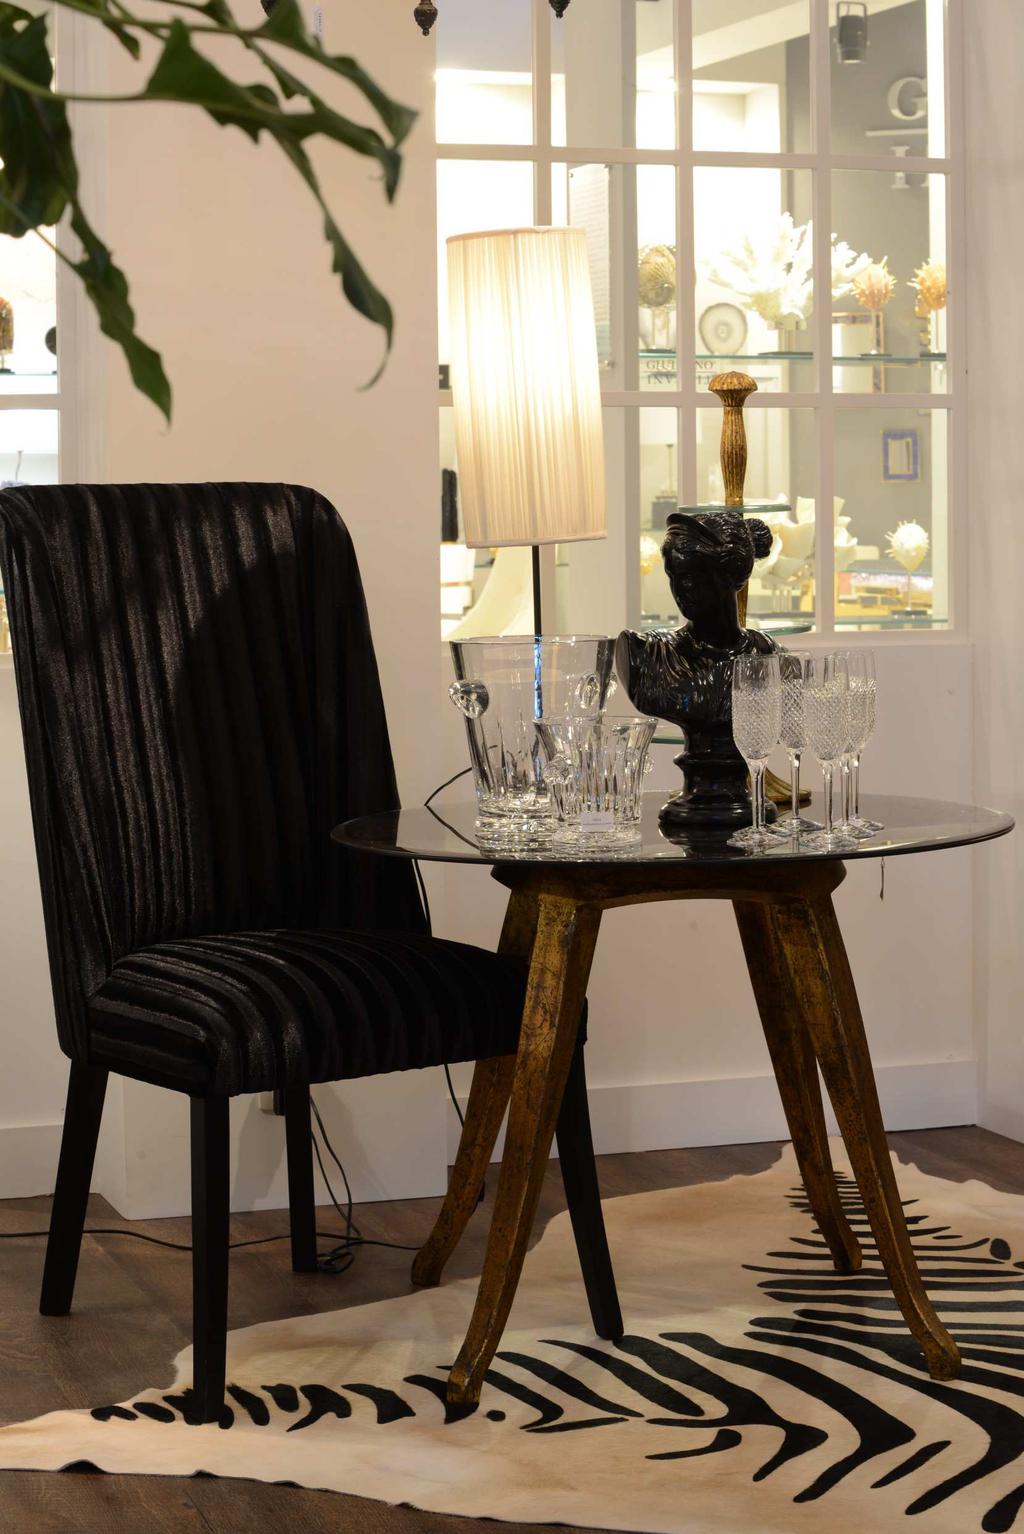 F6100 Corsa Chair with Black Velvet FR312-5 Vintage Table Aged Mirror Gold (d85;h67) K5617-0 Champagne Bucket Cristal K5616-0 Ice Bucket Cristal K5603-0 Champagne Glass